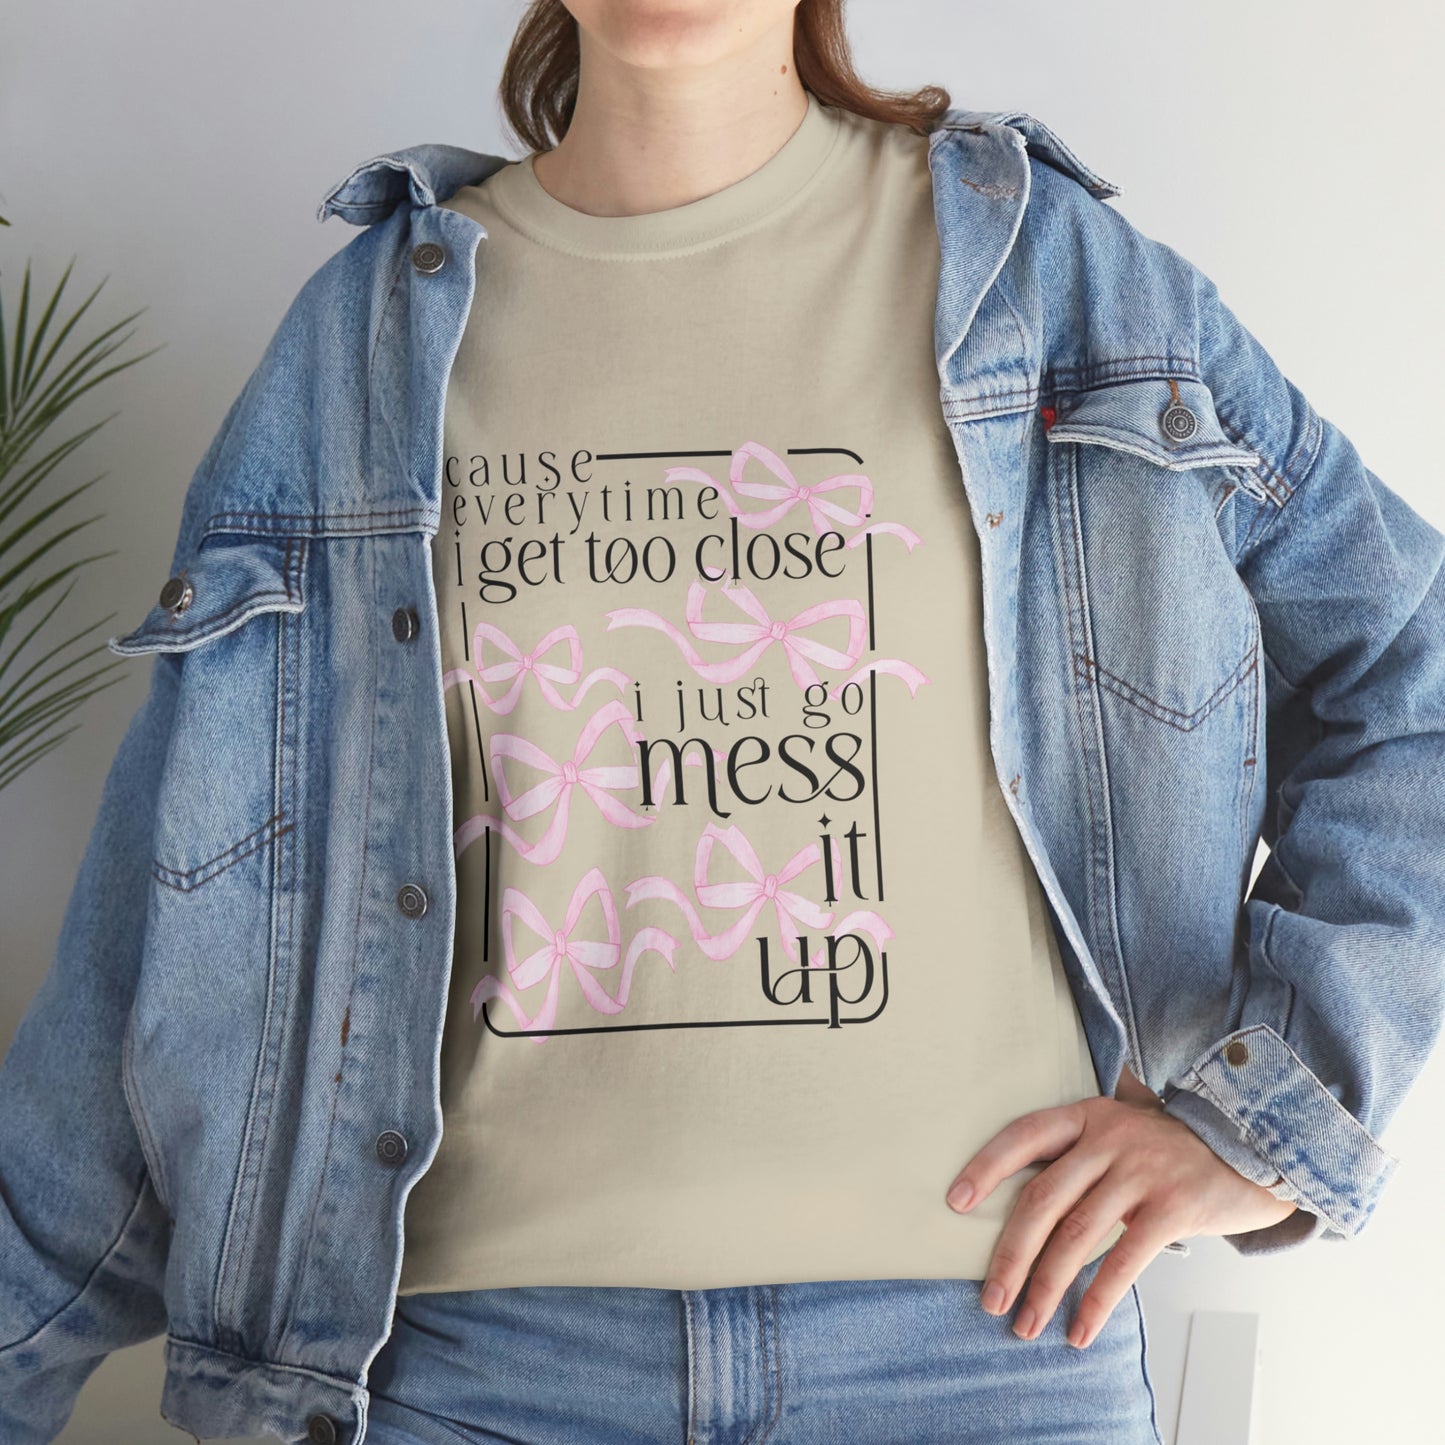 Mess it up Tee